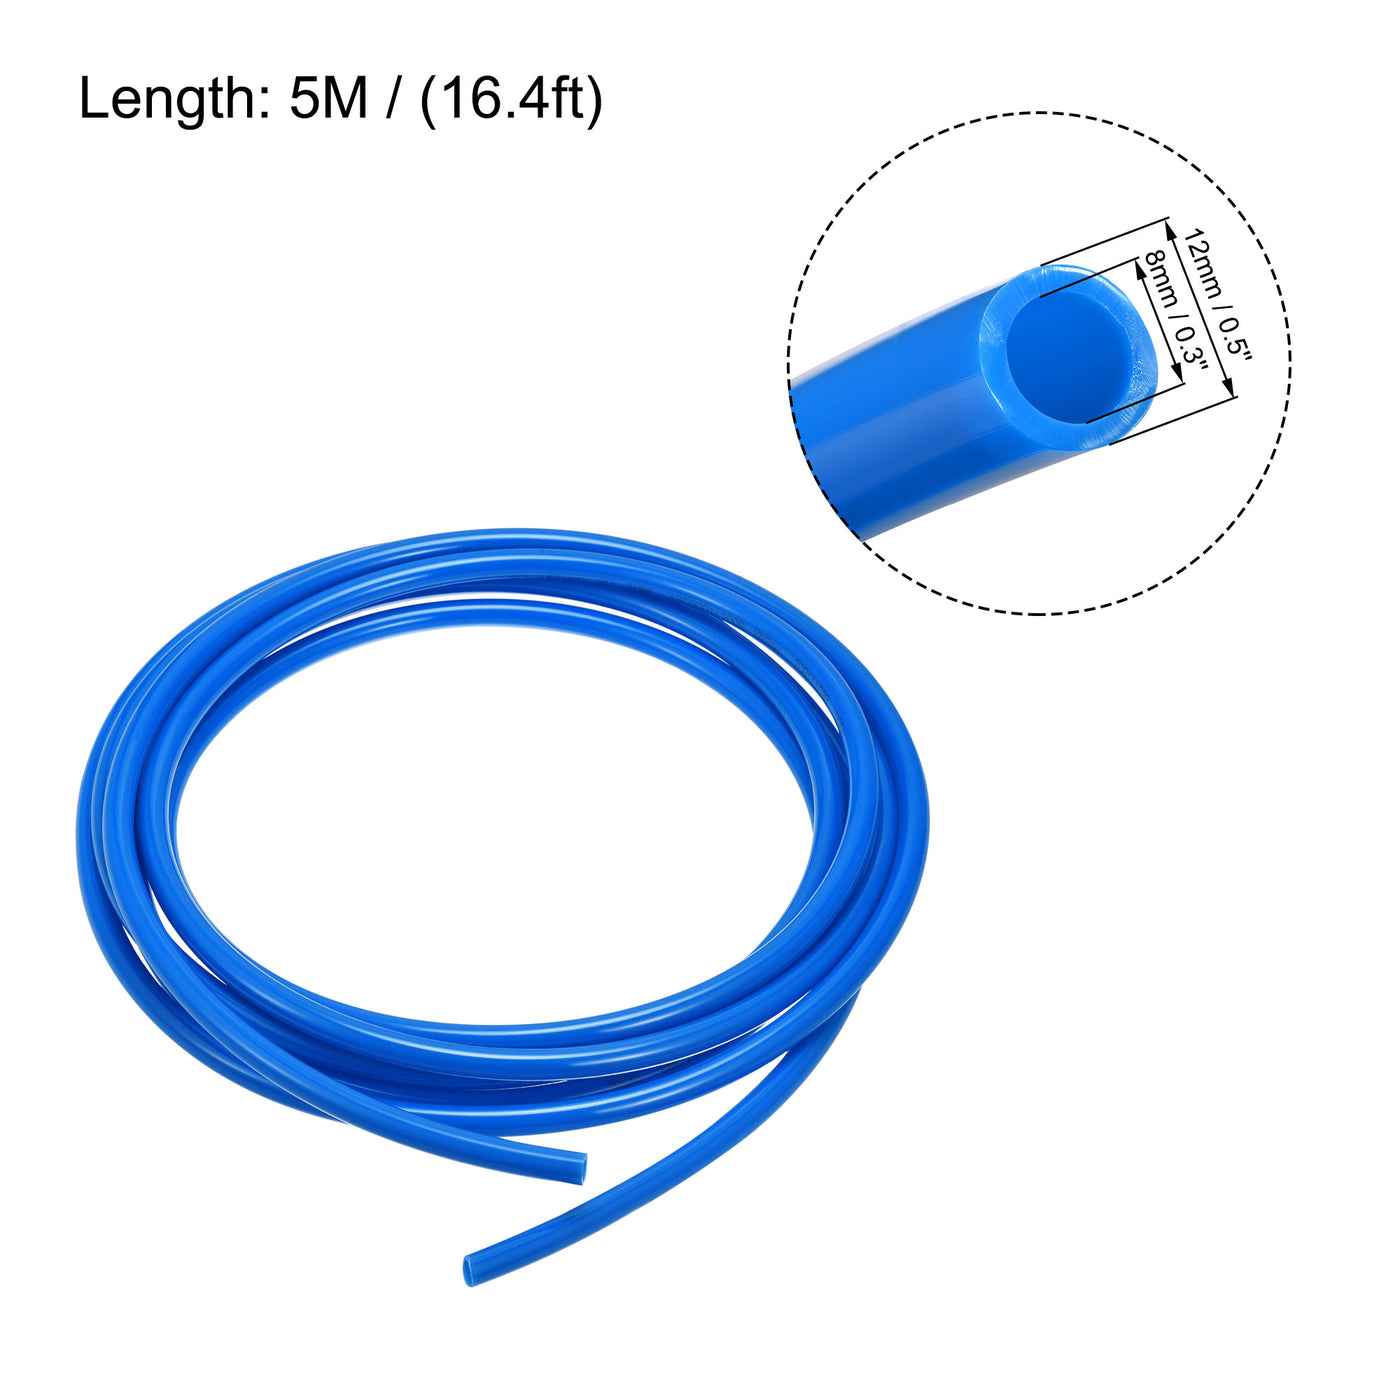 uxcell Uxcell Pneumatic Air Hose Tubing PU Air Compressor Tube 8mm/0.3''ID x 12mm/0.5''OD x 5m/16.4Ft Polyurethane Pipe Blue with 7 Type Connect Fittings